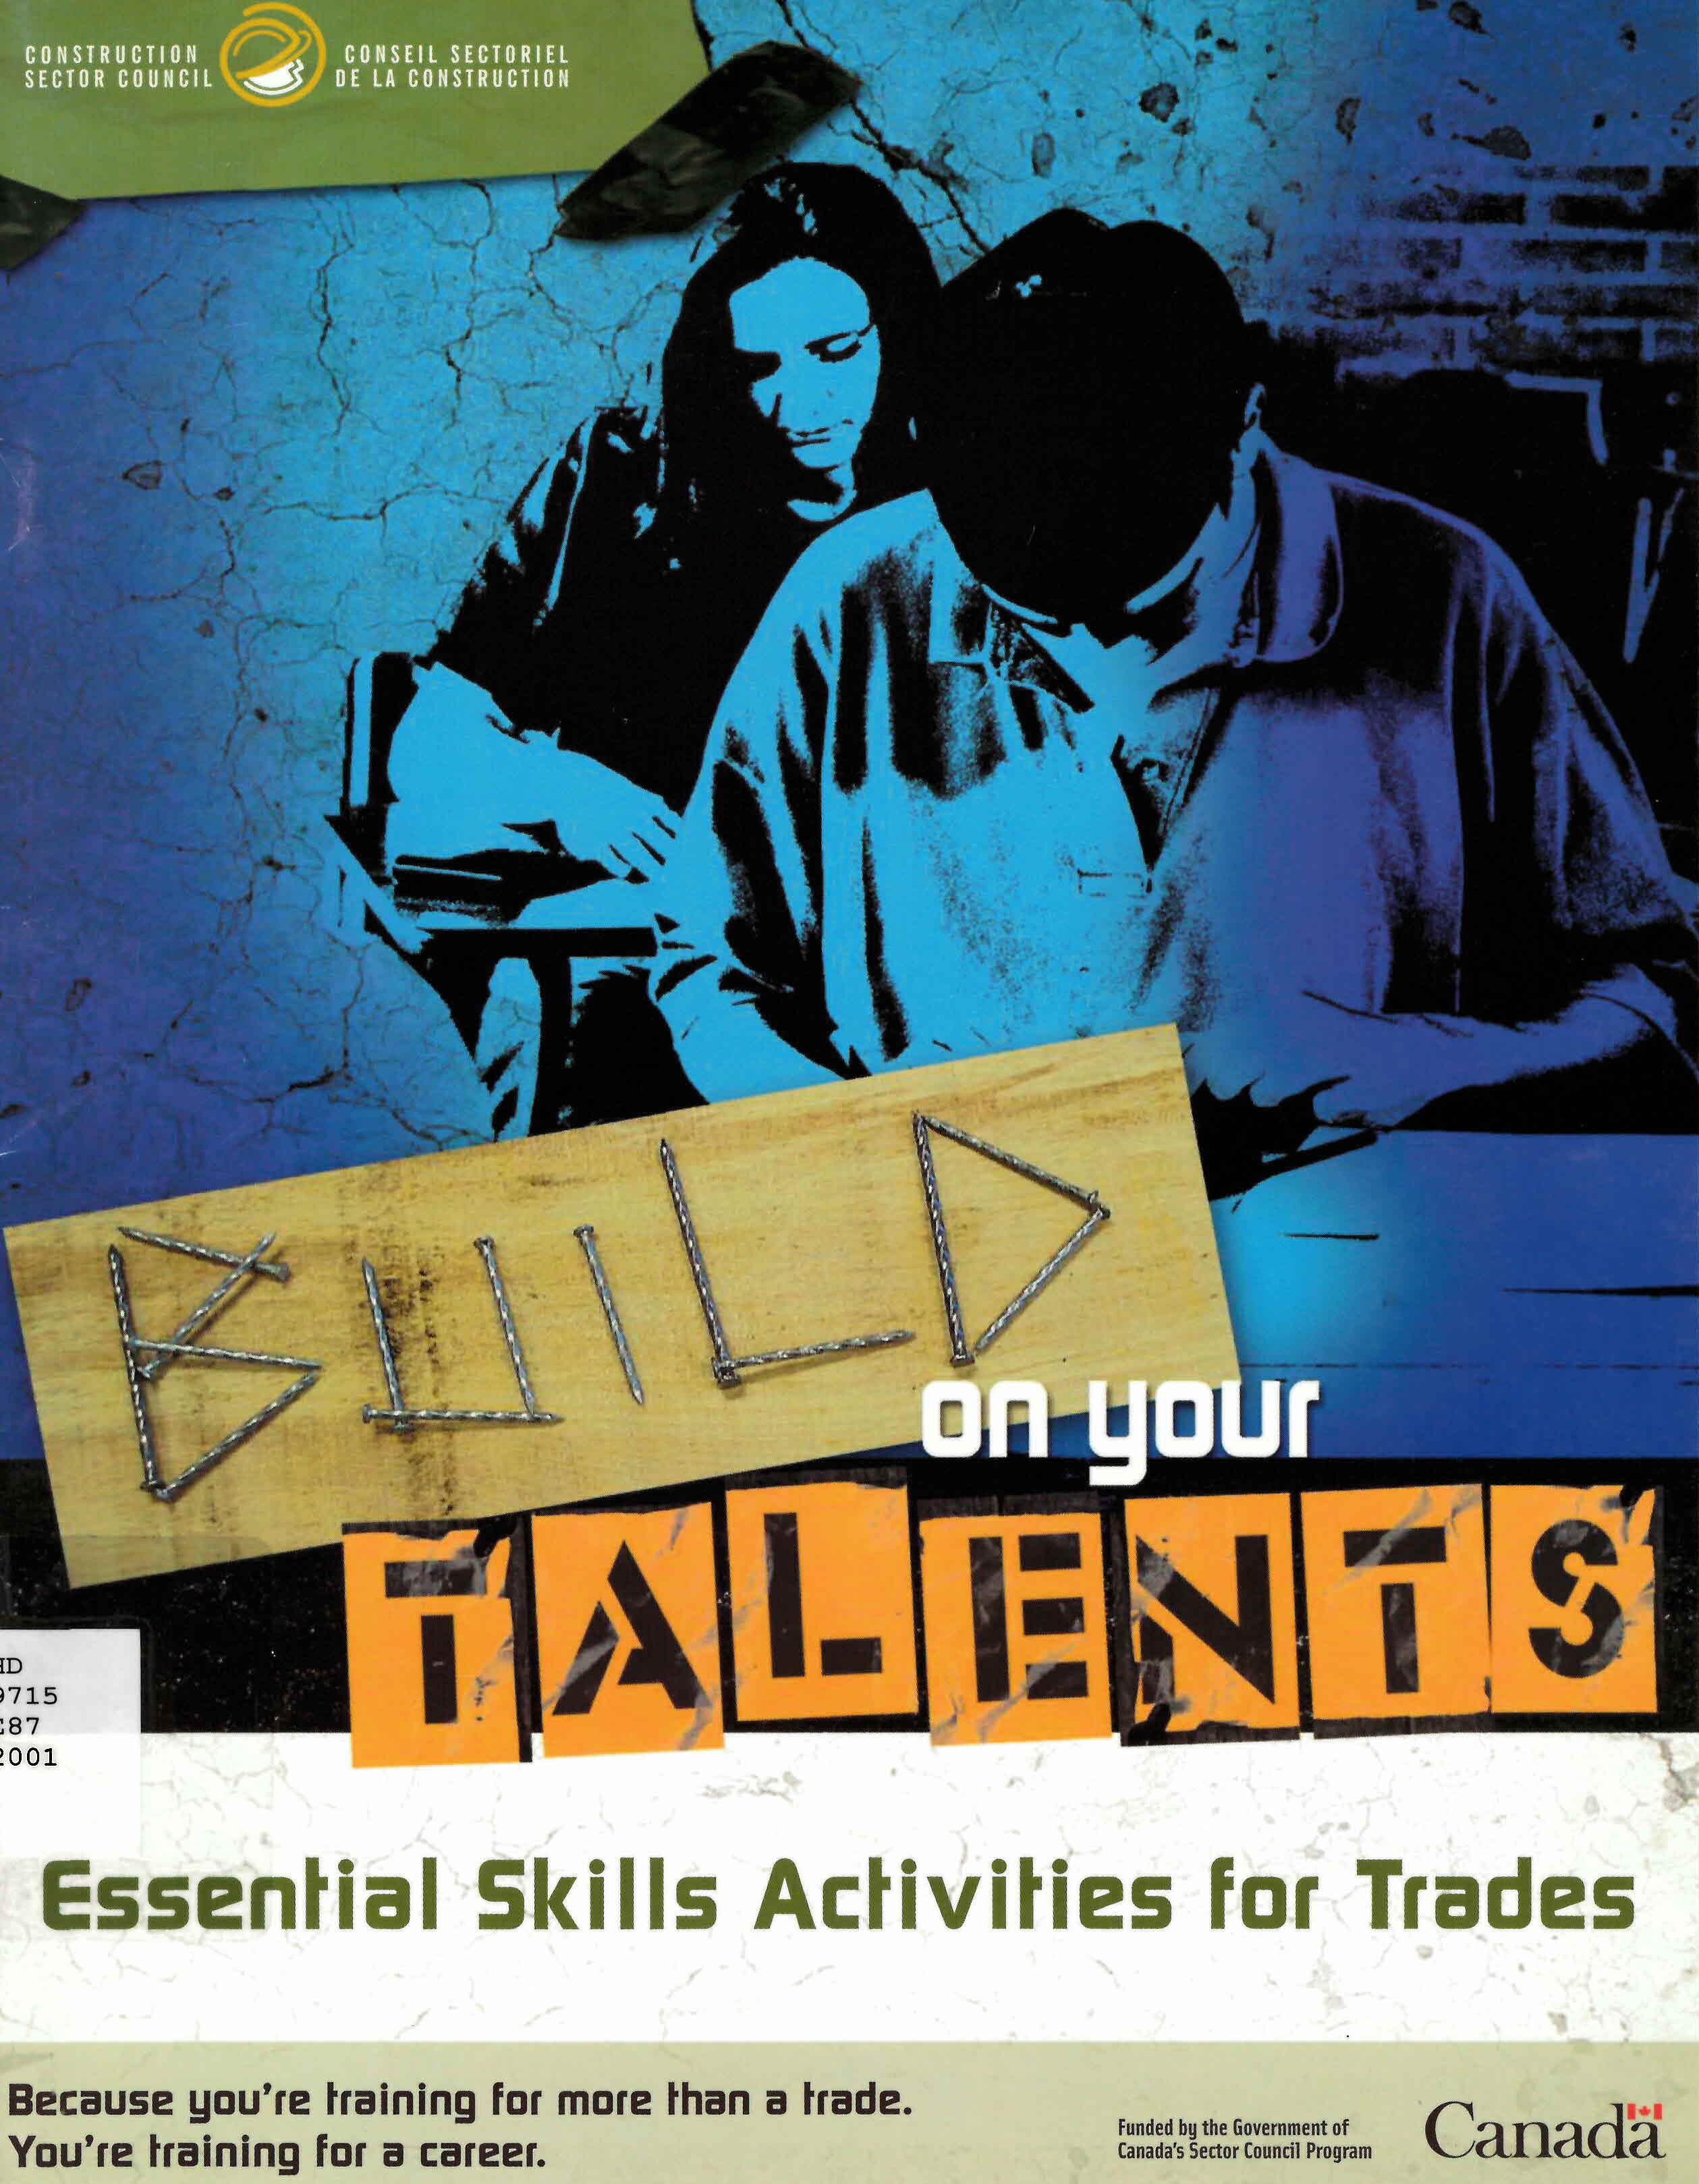 Essential skills activities for trades